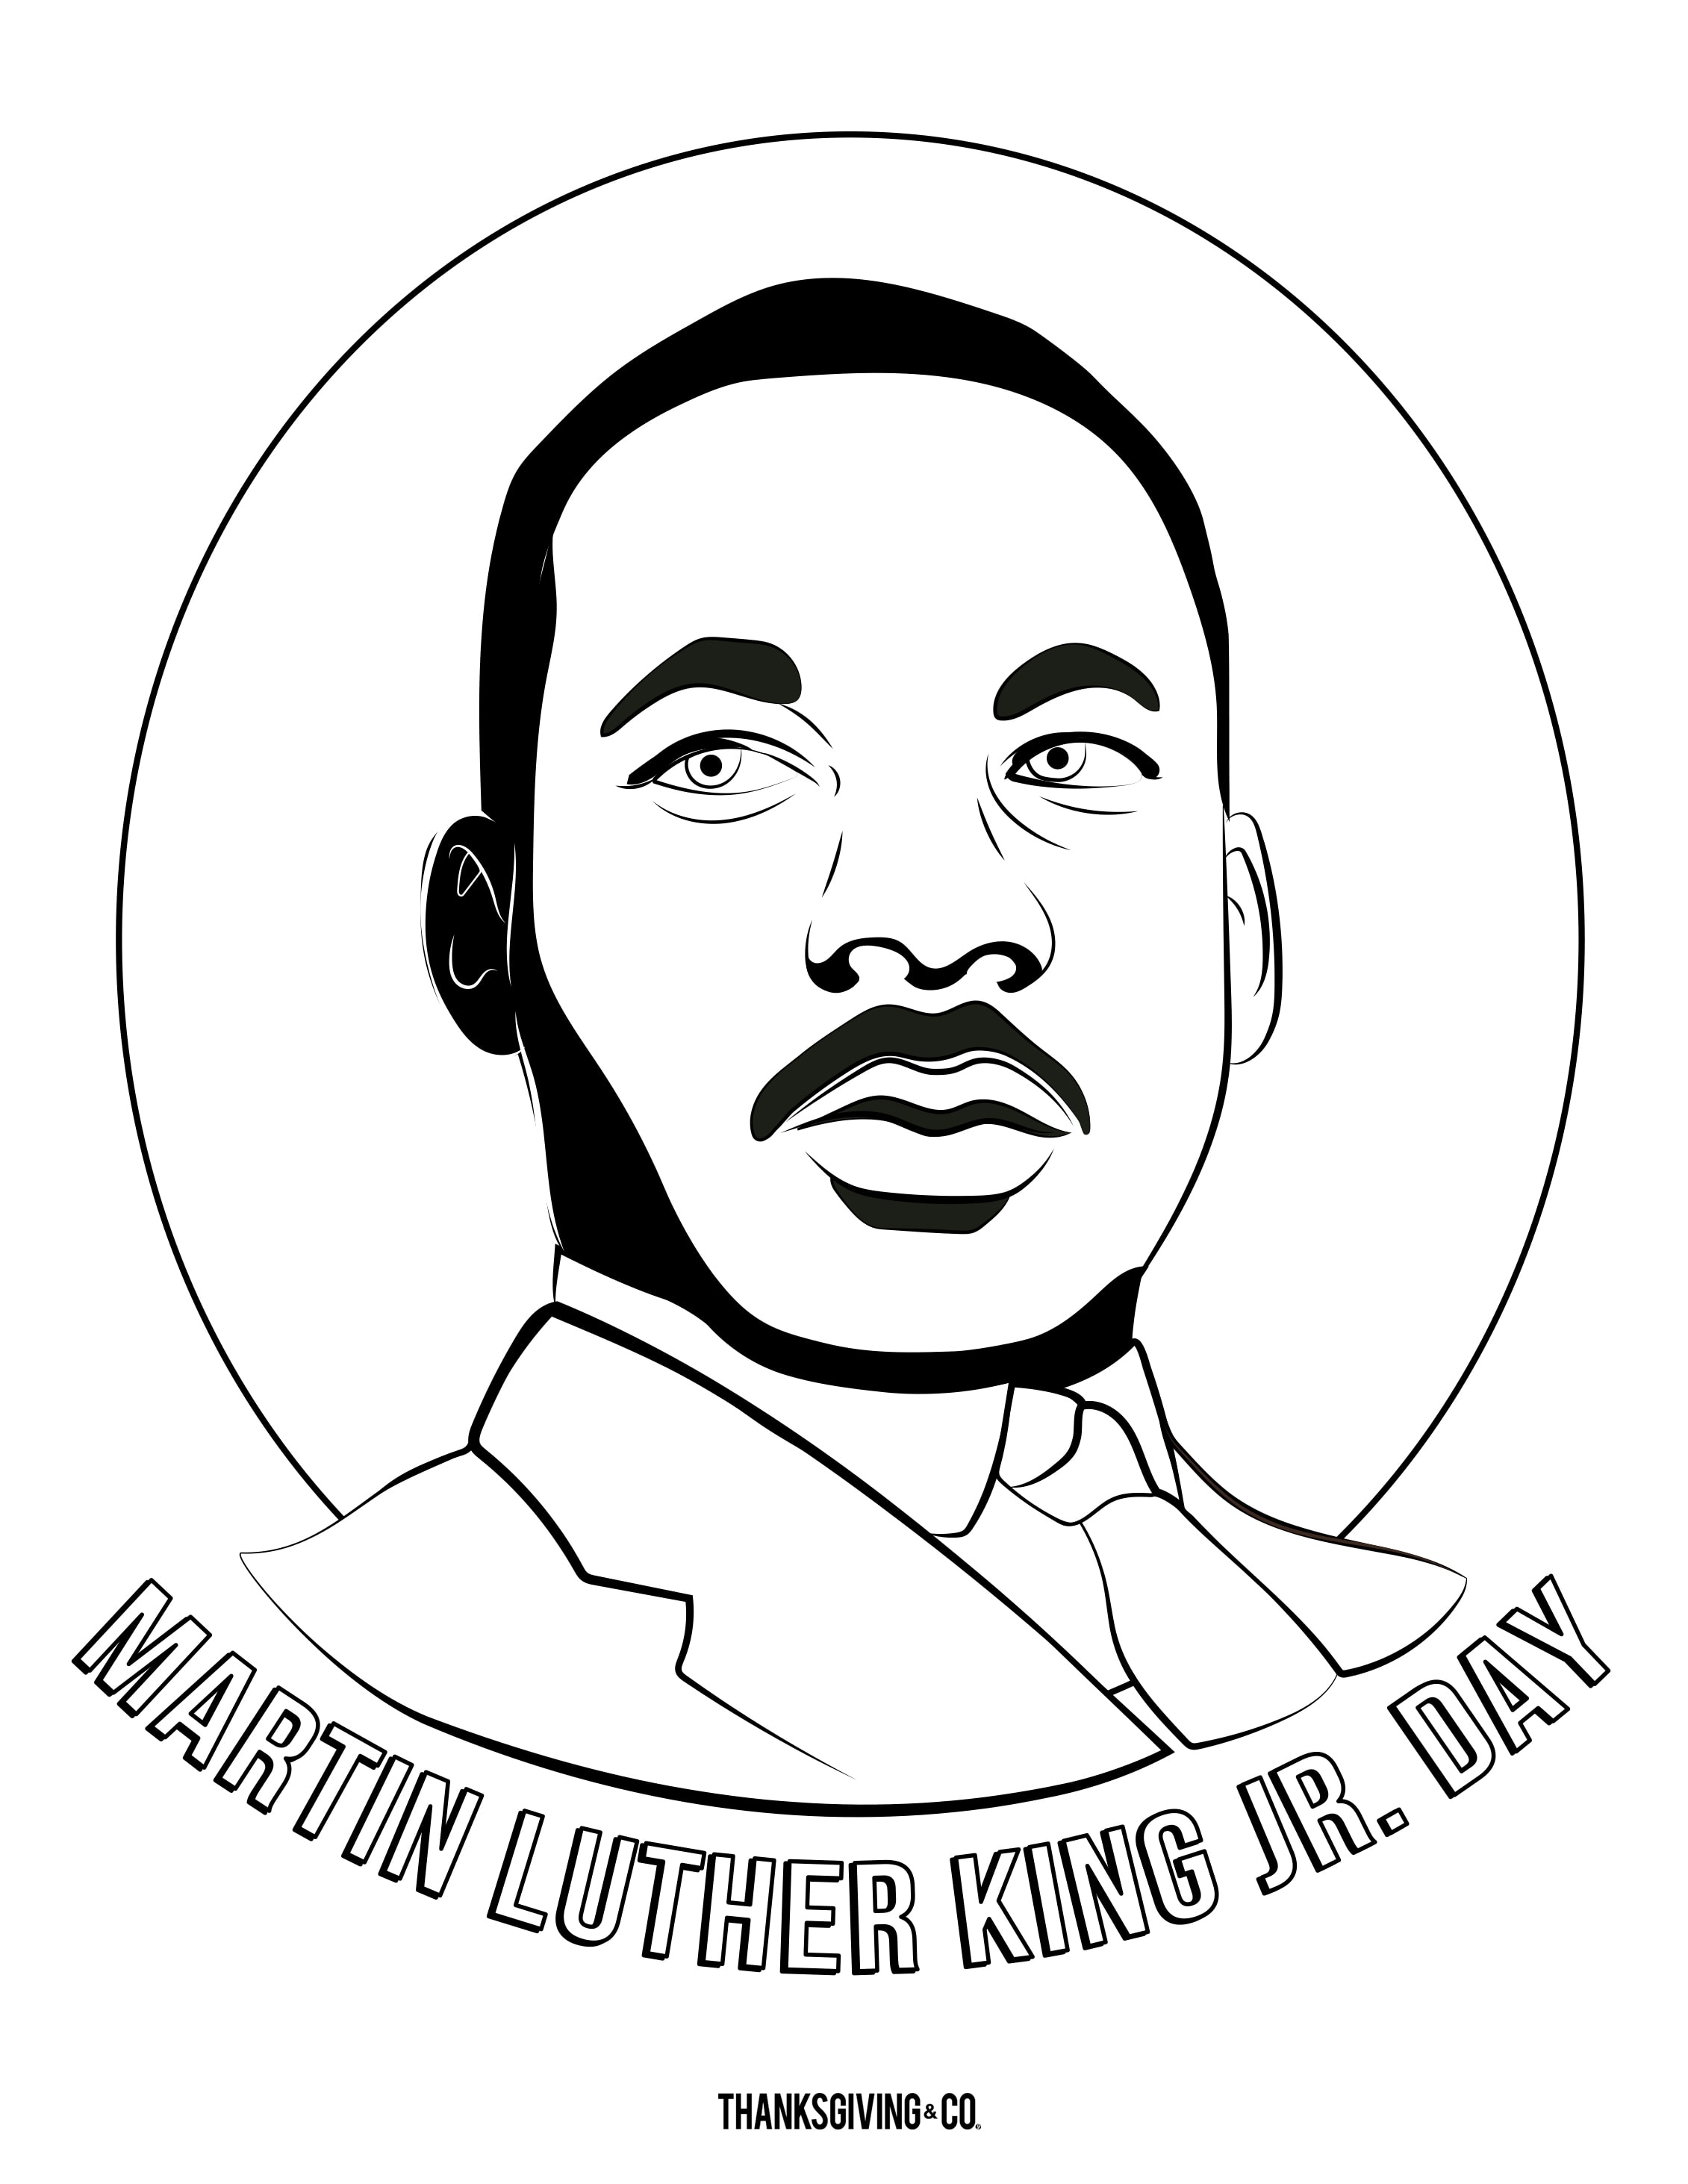 Share these fun Martin Luther King Jr. coloring pages with your